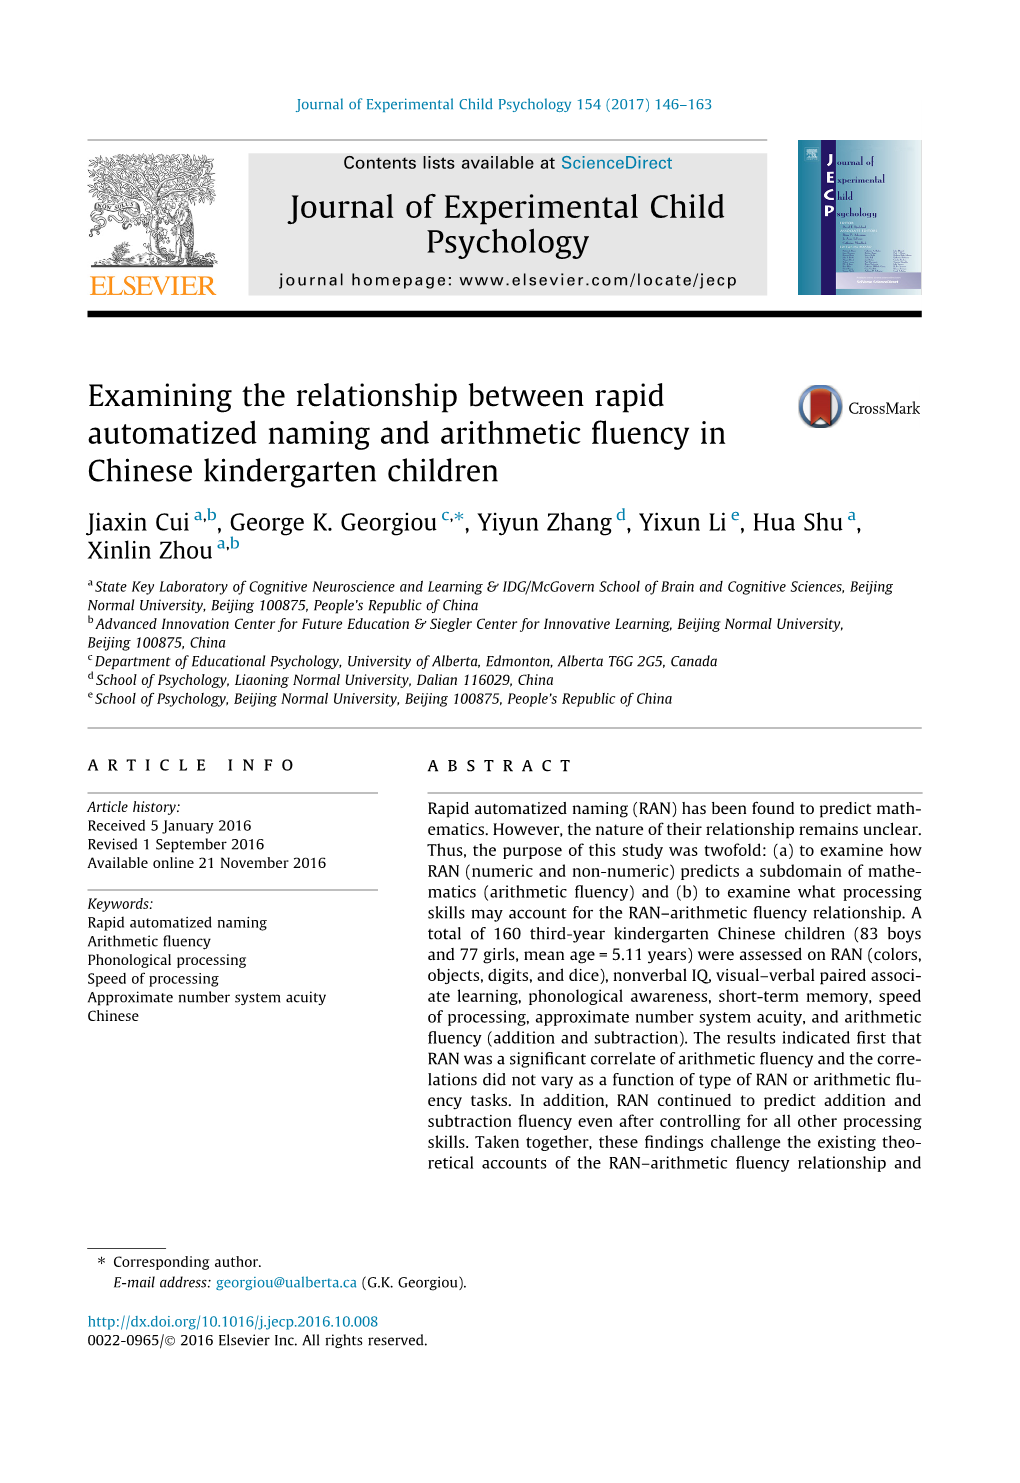 Examining the Relationship Between Rapid Automatized Naming and Arithmetic ﬂuency in Chinese Kindergarten Children ⇑ Jiaxin Cui A,B, George K